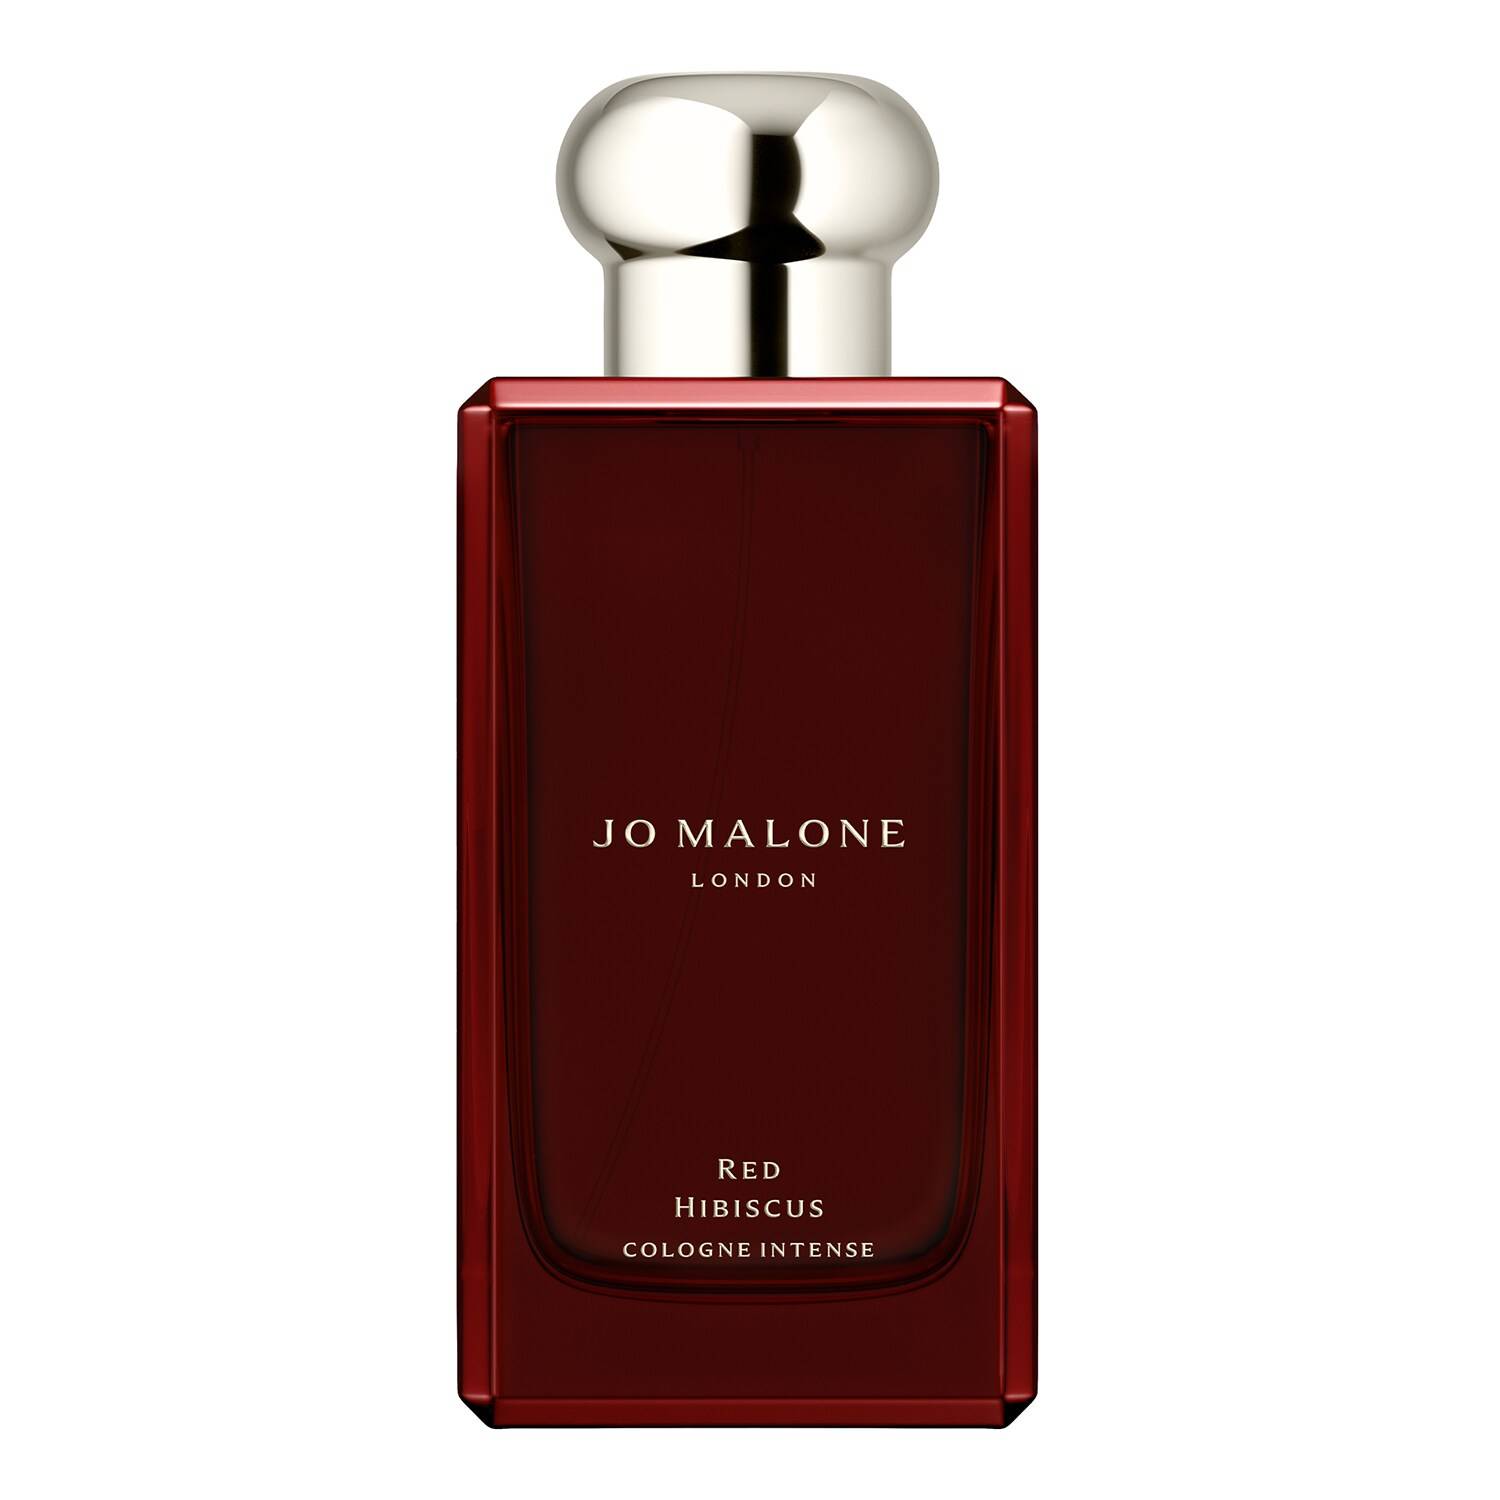 Jo Malone London Red Hibiscus Cologne Intense 100Ml